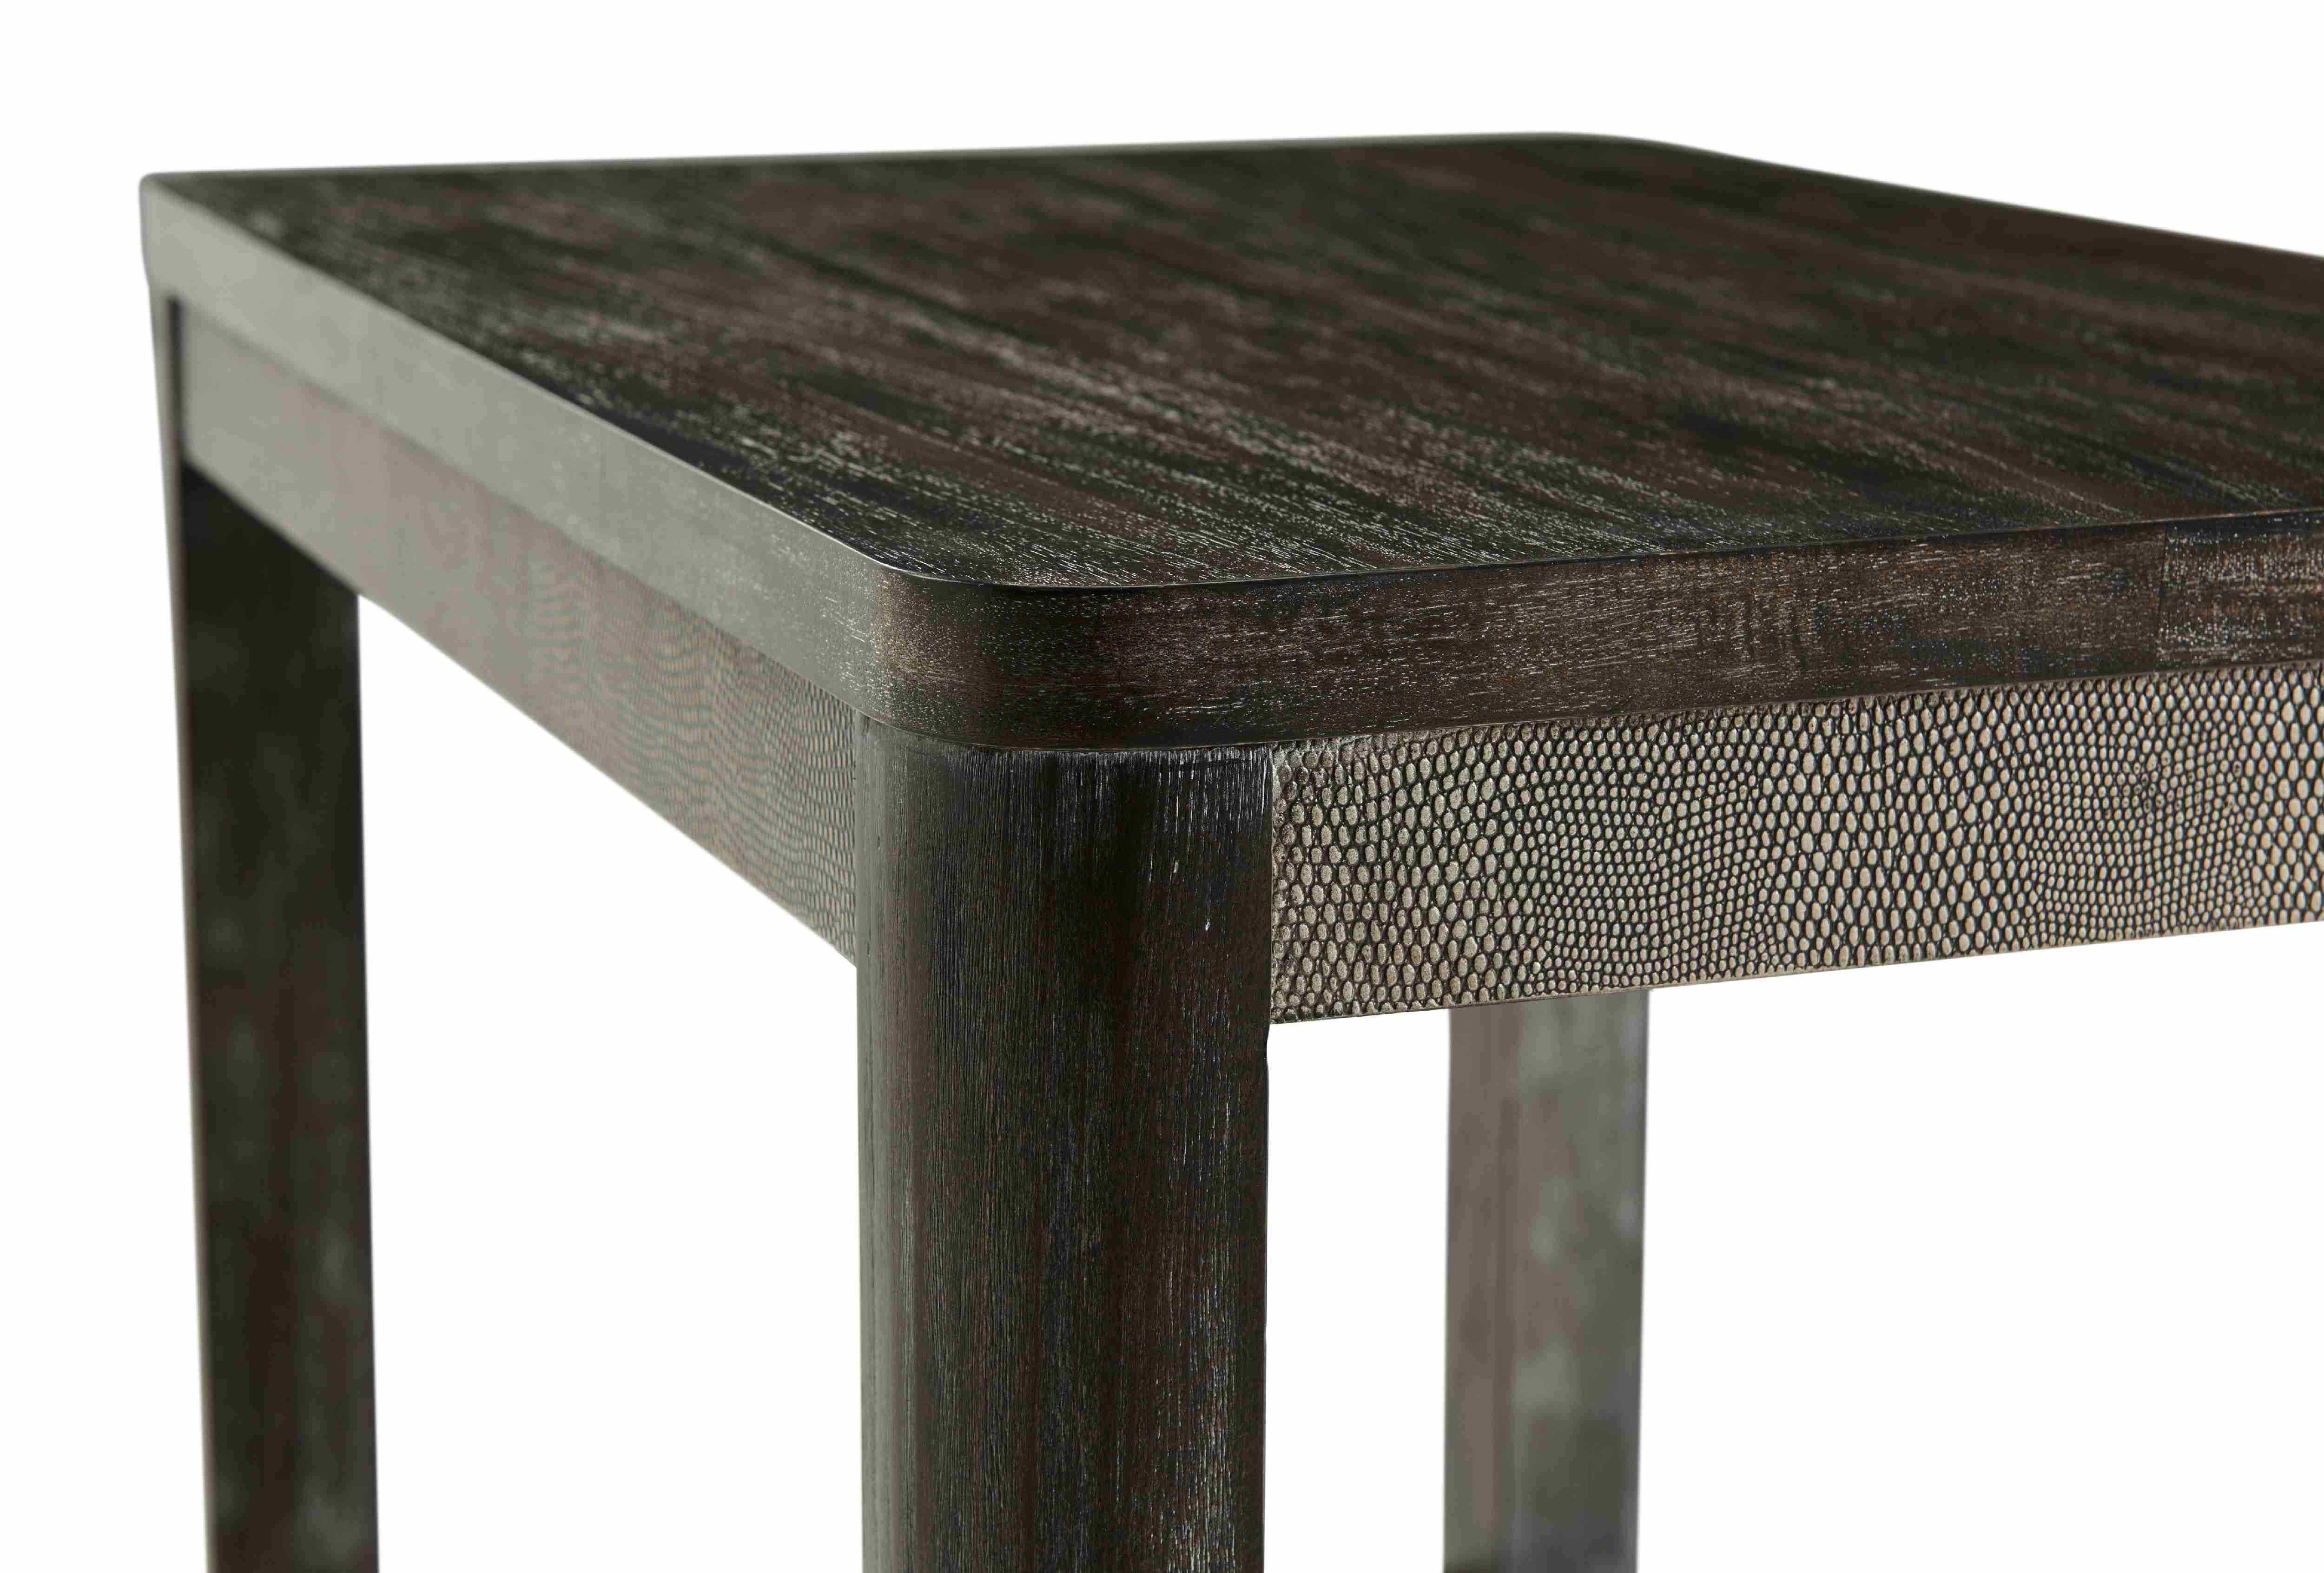 RILEY SIDE TABLE